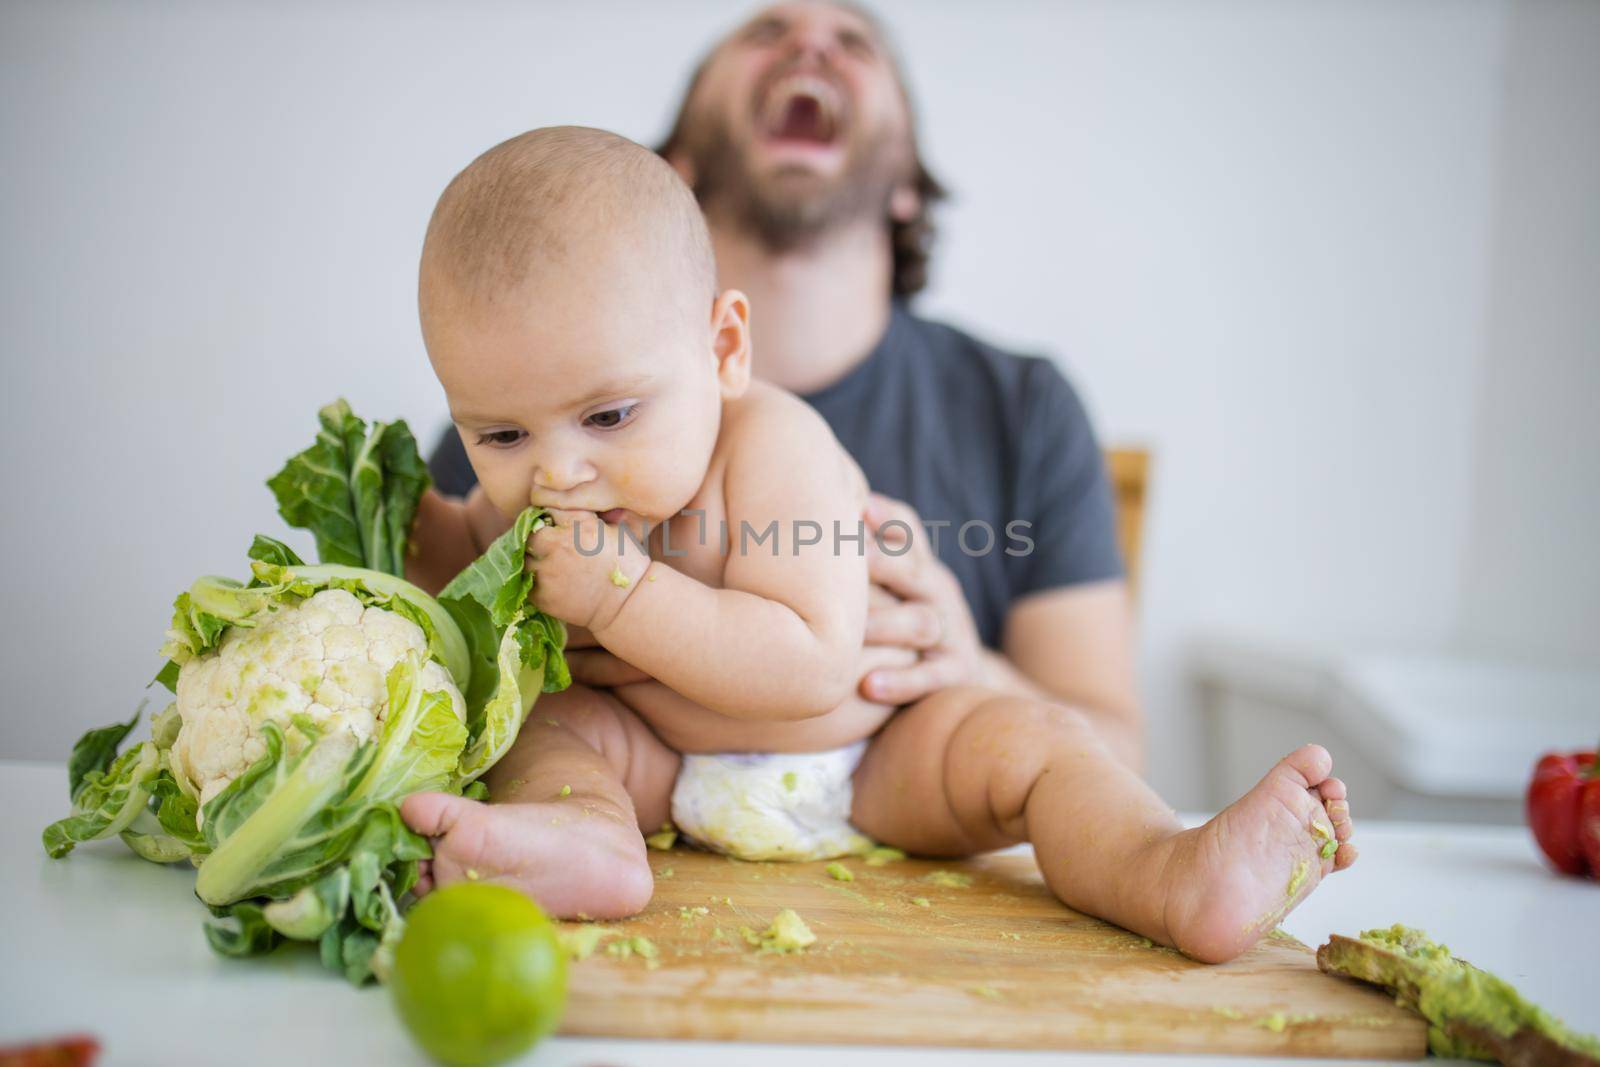 Father laughing hysterically and holding his happy baby daughter above table. Adorable baby sitting on wooden board and biting cauliflower. Babies interacting with food